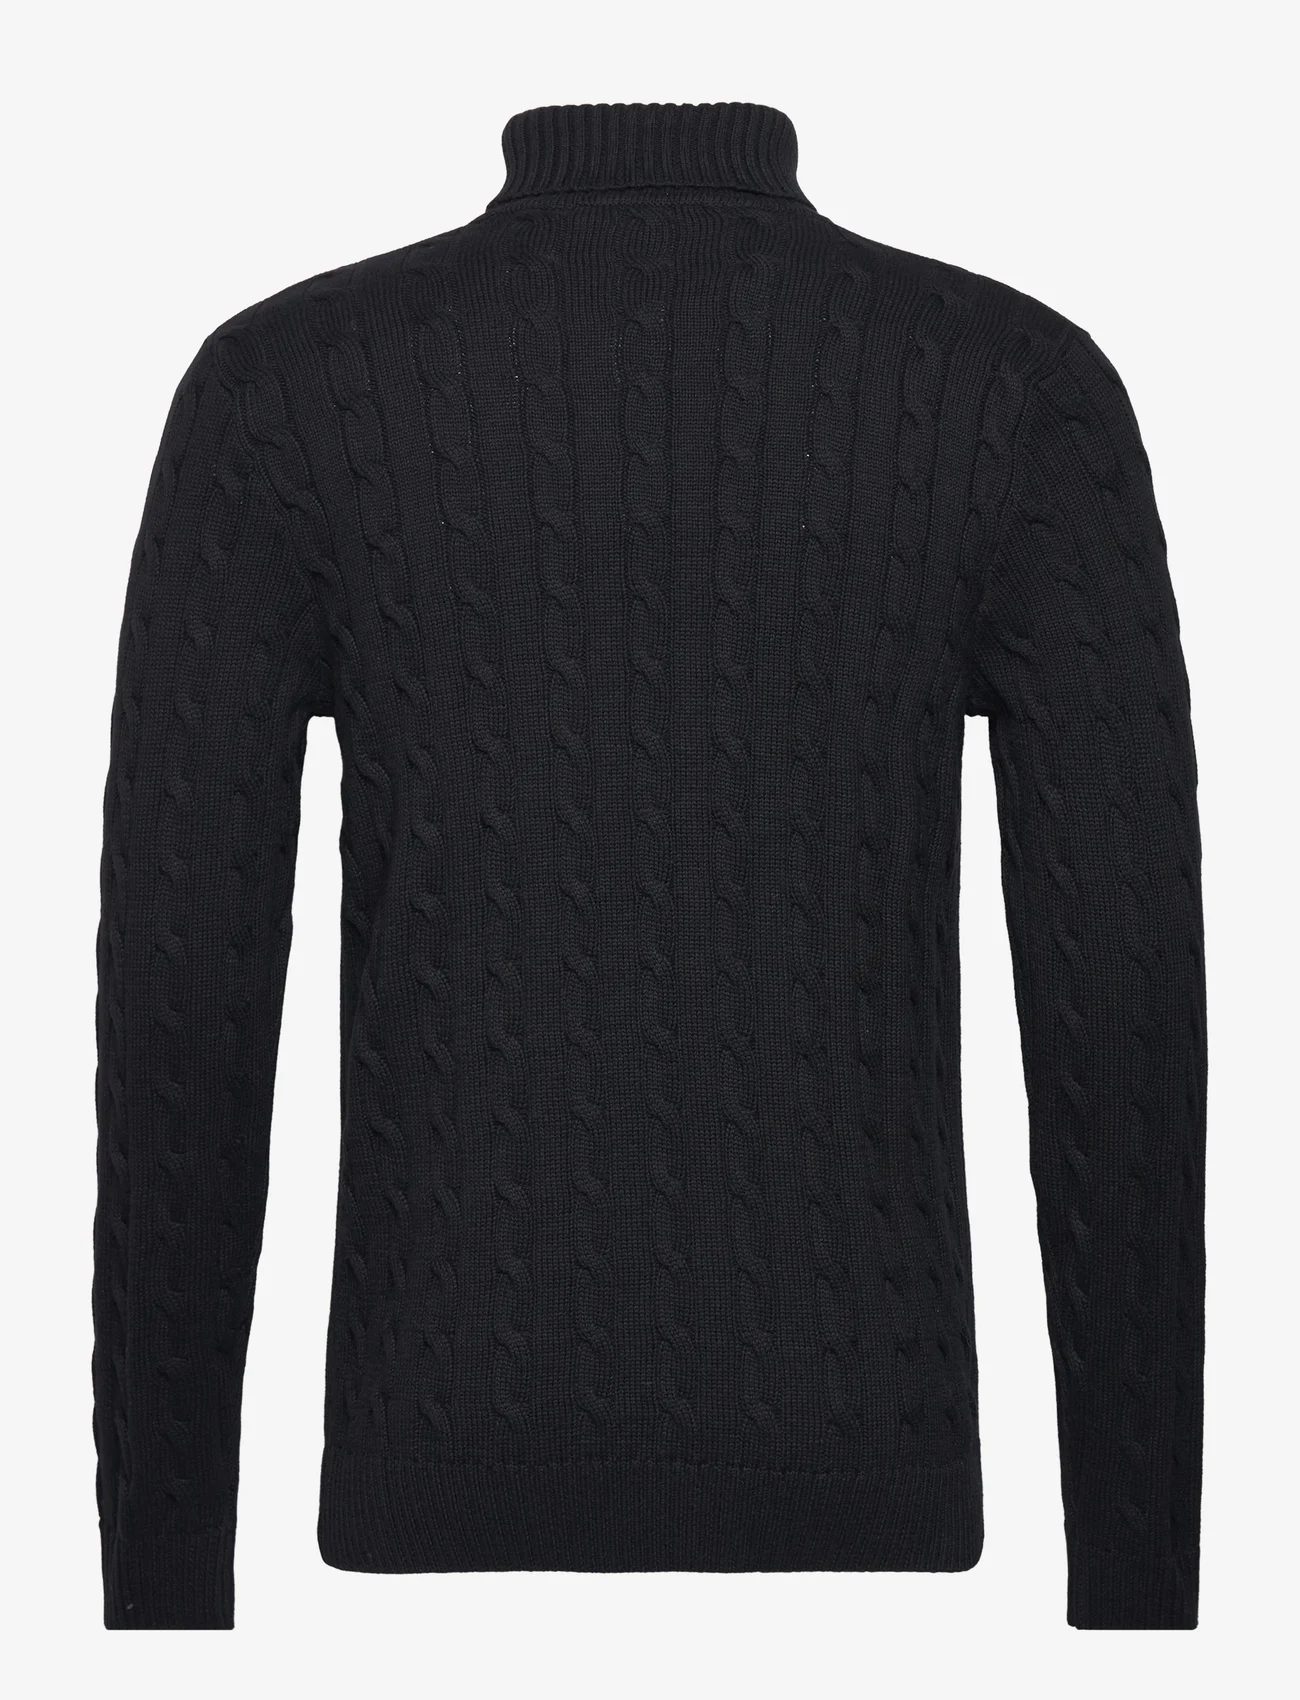 Selected Homme - SLHRYAN STRUCTURE ROLL NECK W - perusneuleet - black - 1